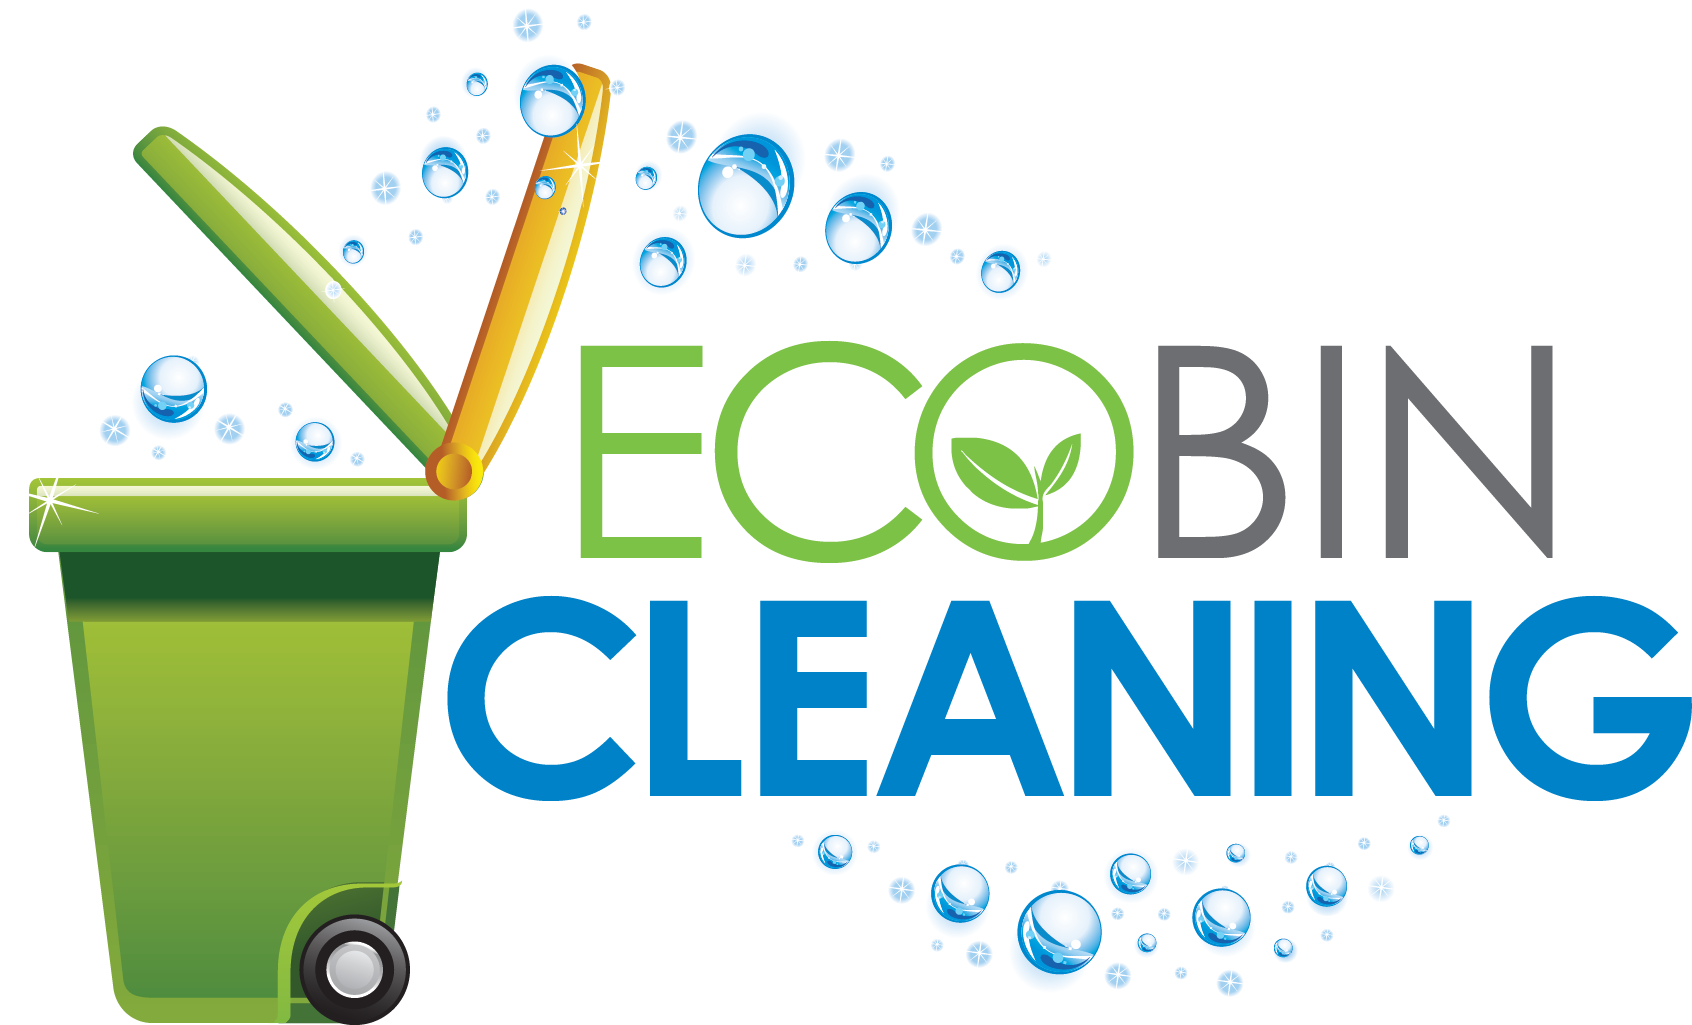 Local clean. Eco Wash logo. Clean bin. Cleaning Trash. Cleaning brands.